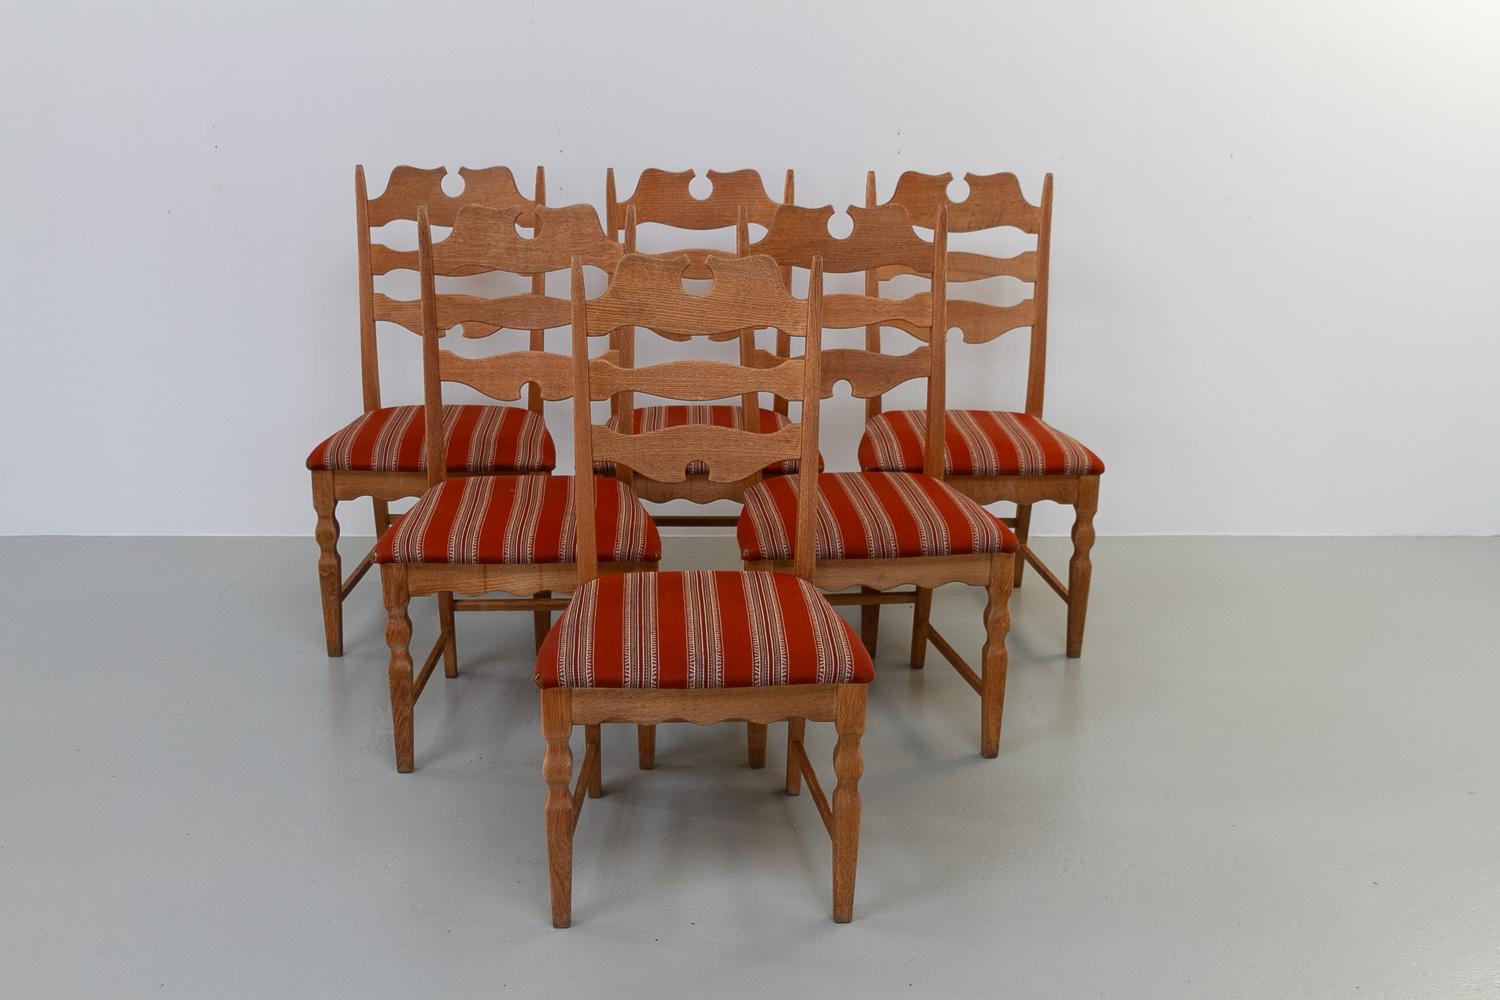 Danish Modern High Back Razor Blade Oak Chairs by Henning/Henry Kjærnulf, for EG Møbler, Denmark 1960s. Set of six.

Vintage Danish dining chairs in solid nordic oak with original upholstery.

This highback model offers great back support as well as